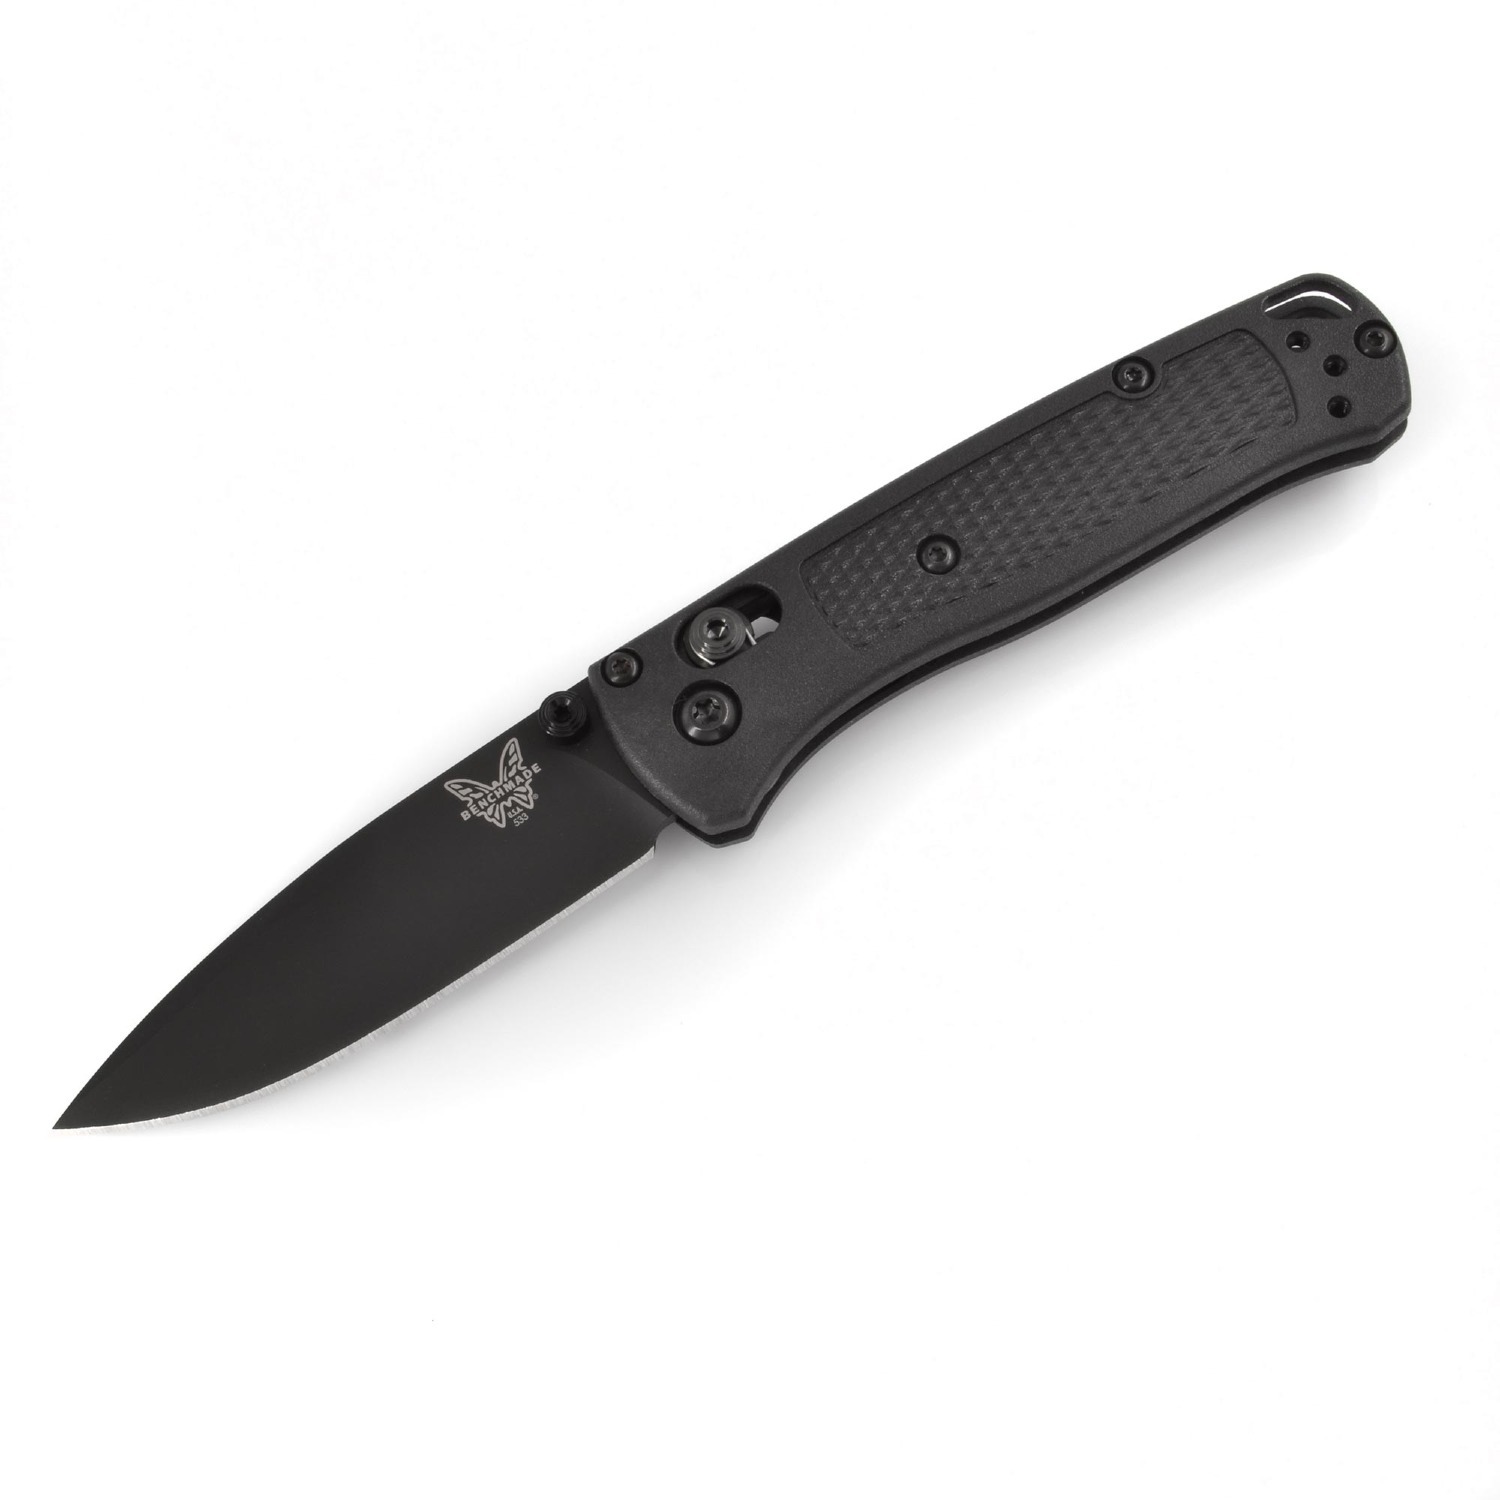 30% Off Select Benchmade Knives & Daggars (61 Models Available) from $50.40 + Free Shipping